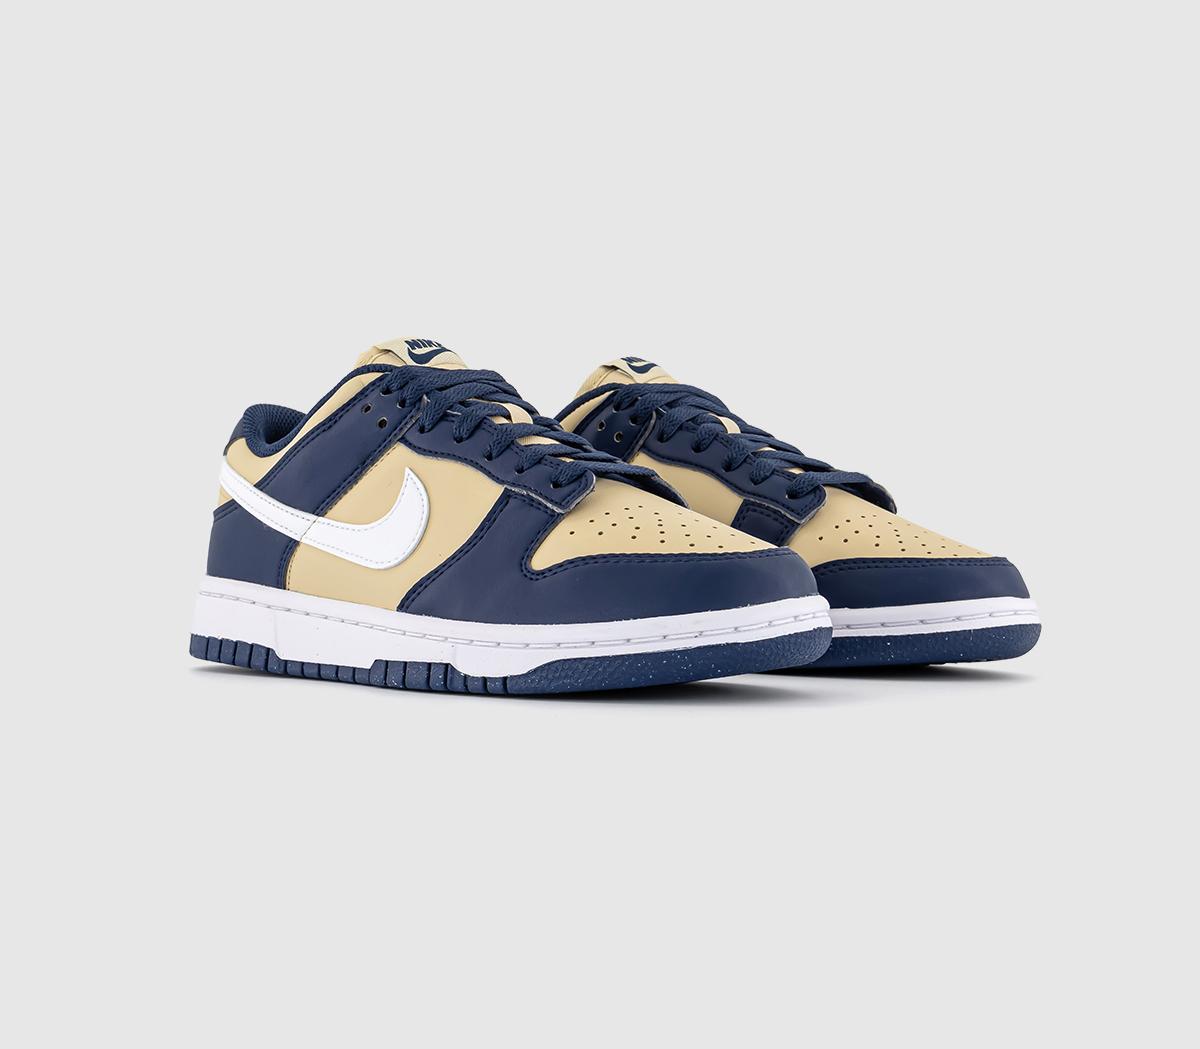 Nike Womens Dunk Low Trainers Midnight Navy White Team Gold Blue, 7